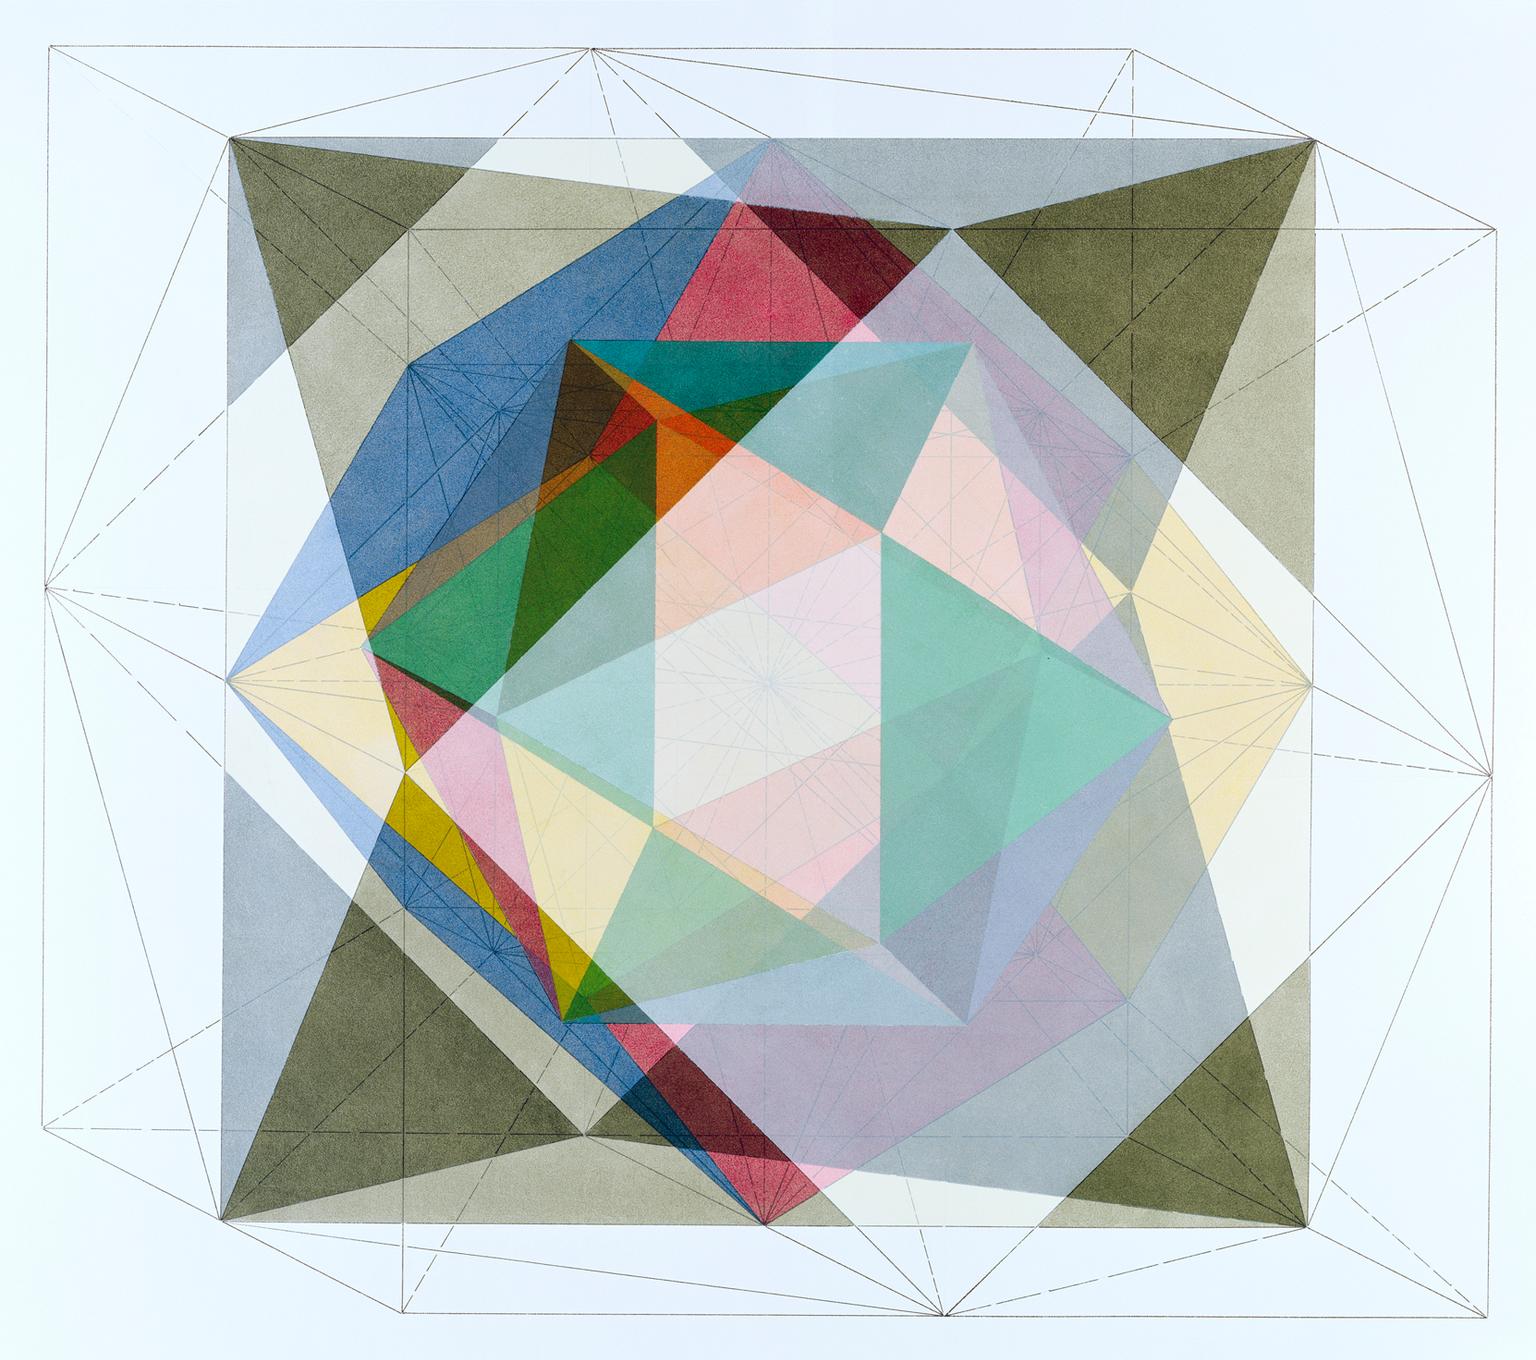 Image for entry 'Print of Chrome 193 : Icosahedron'